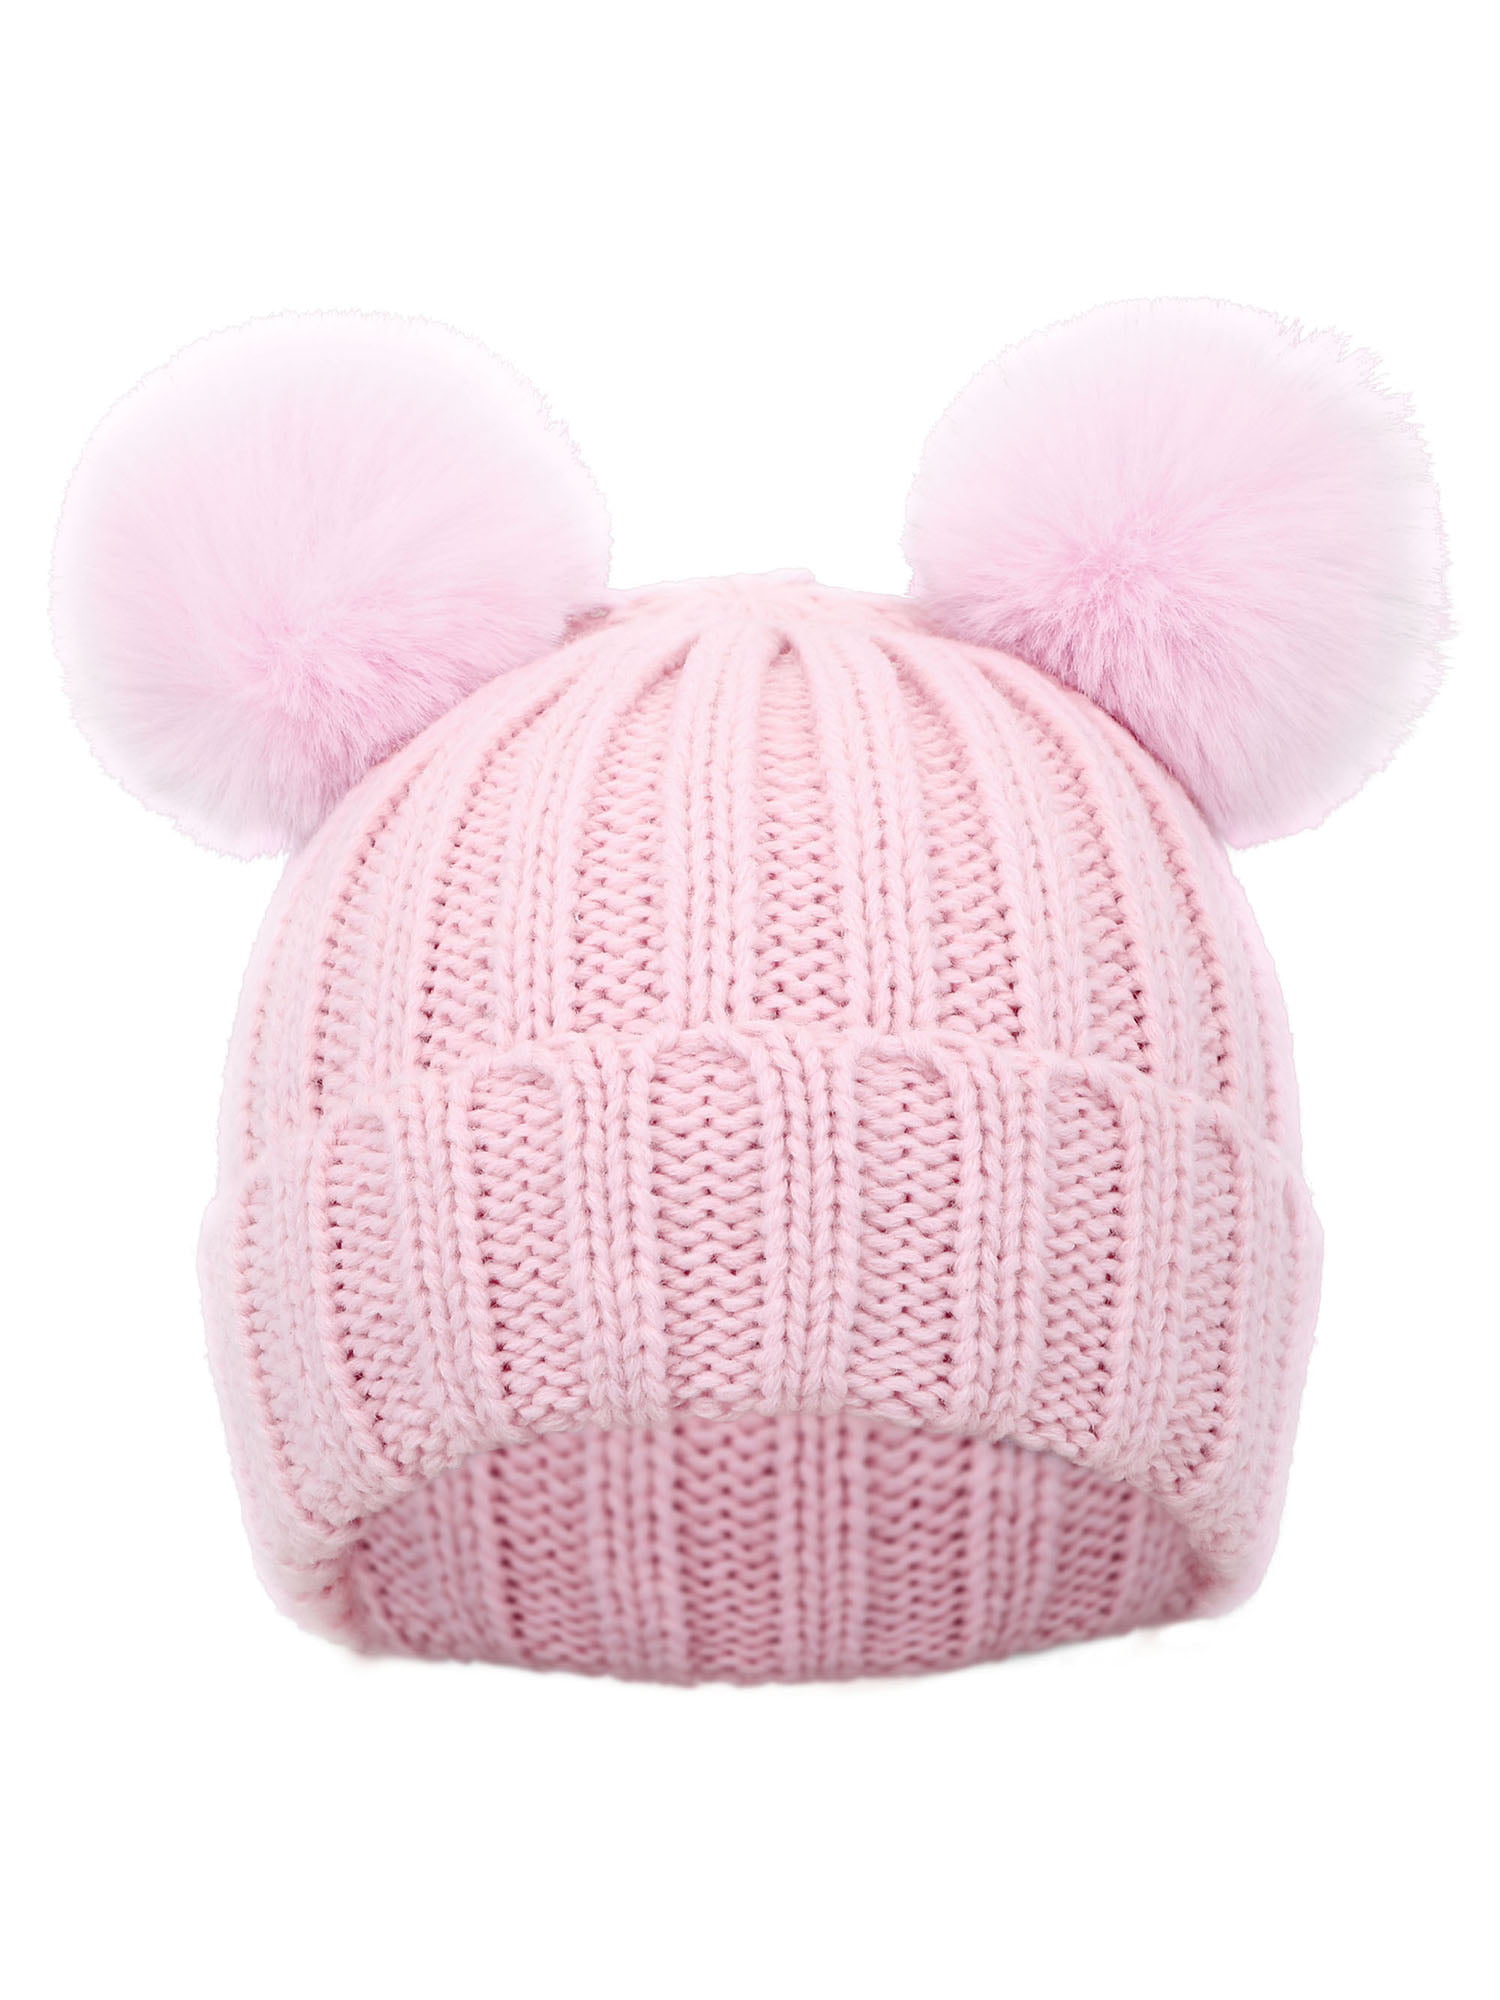 LEEDY Baby Knit Beanie Hat Plush Ball Ears Toddlers Winter Warm Pompom Cap Toddler with Thickened and Comfortable Wool Cotton Internal Suitable for Infant Kids